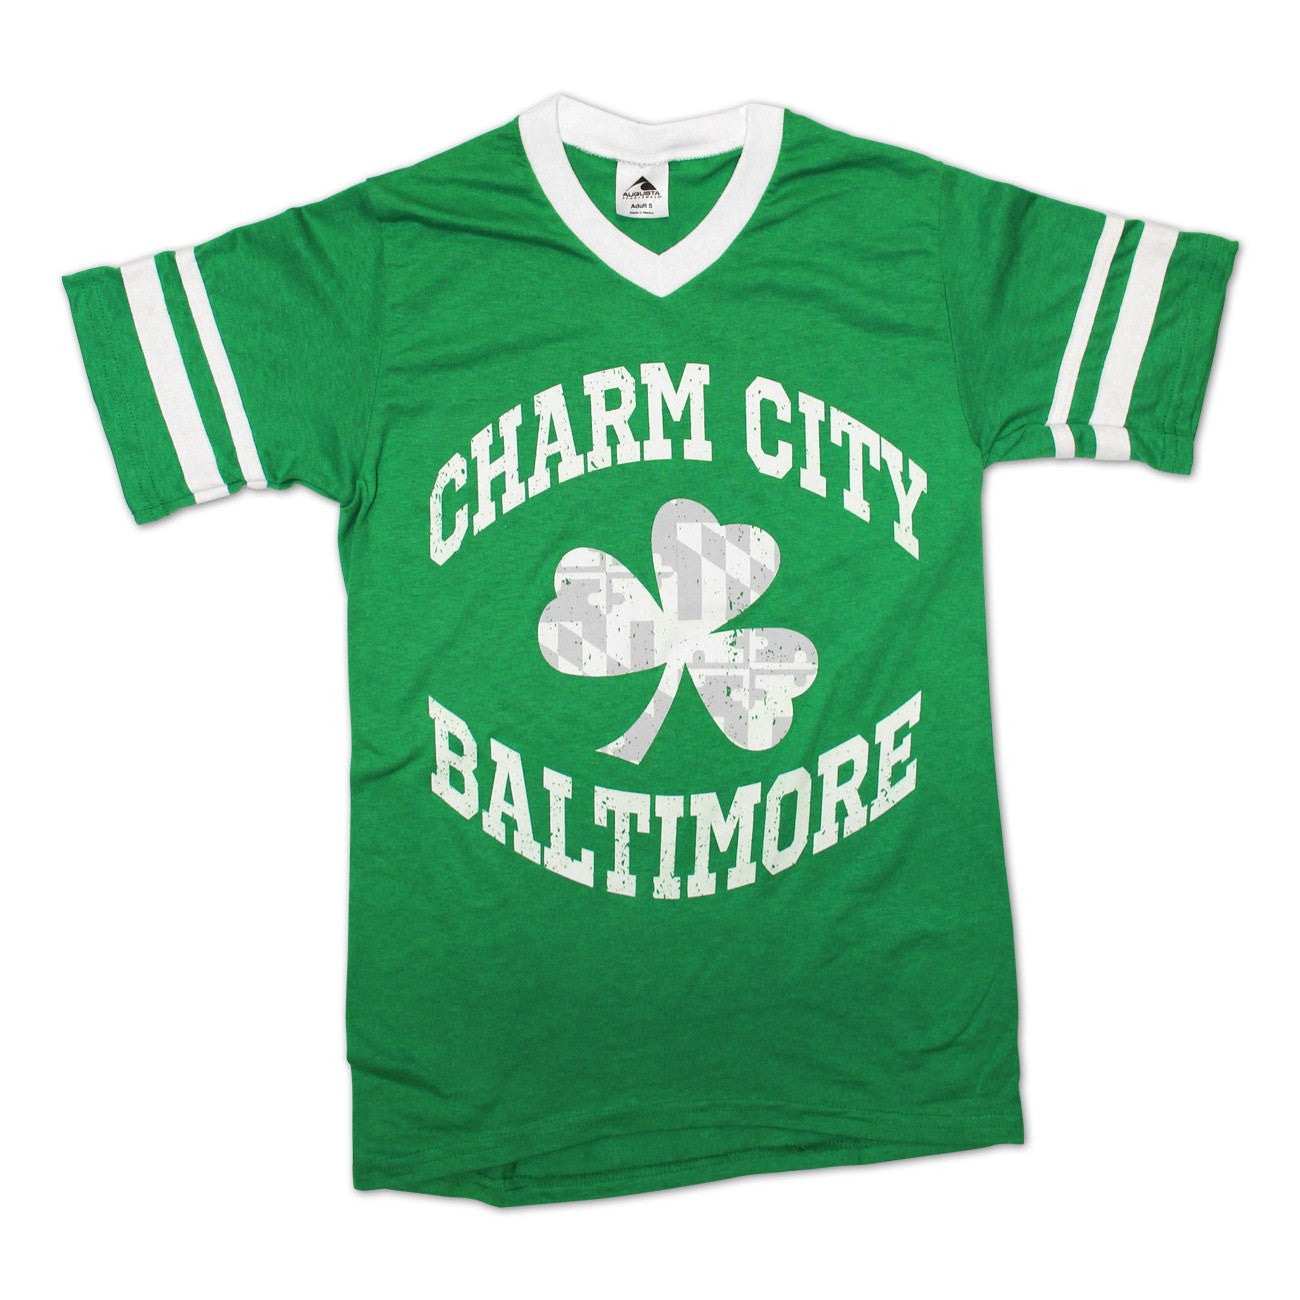 Charm City Shamrock / Striped Sleeve Jersey - Route One Apparel